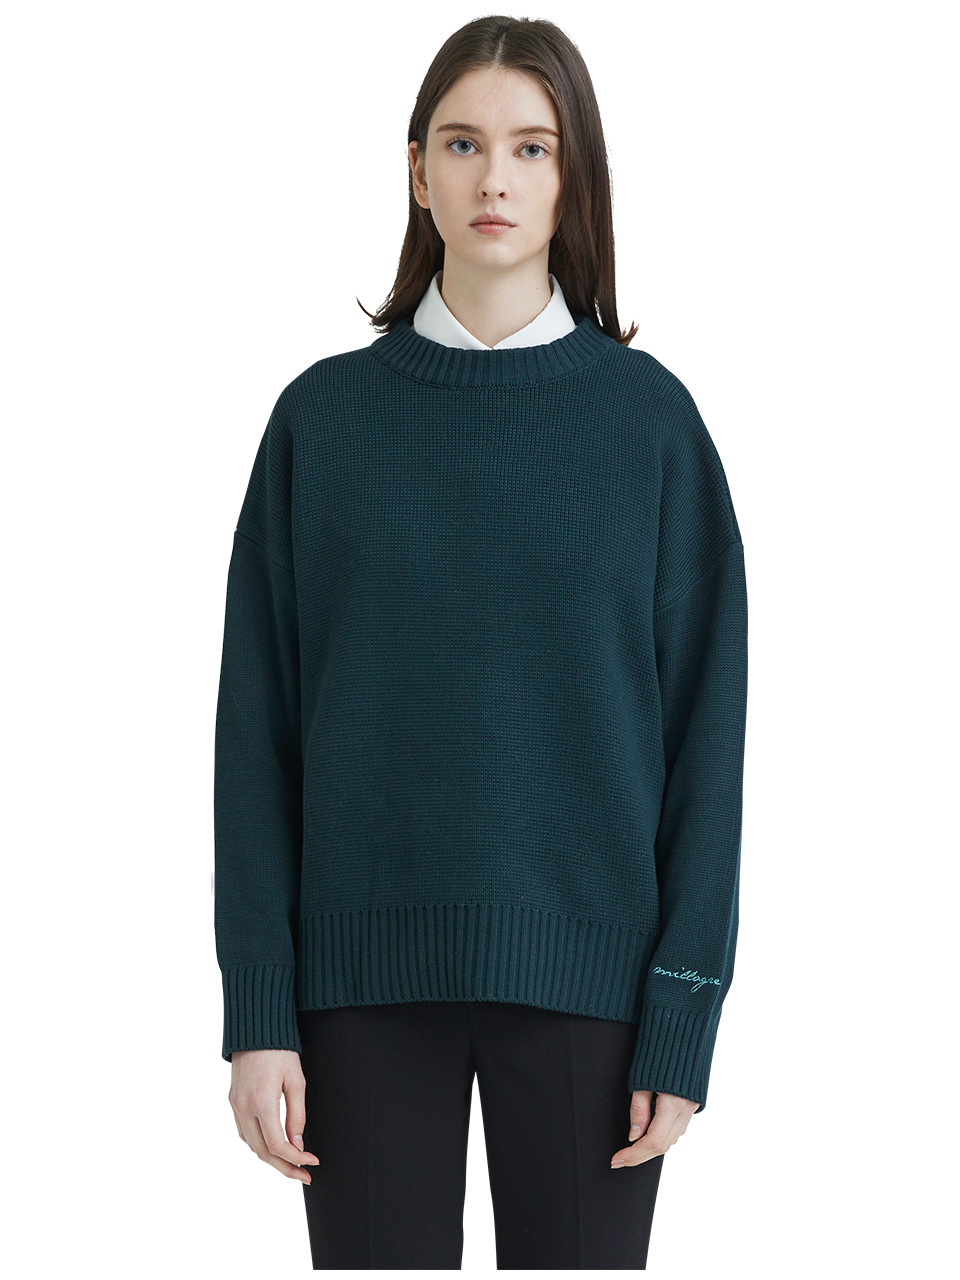 embroideried cuffs sweater - green